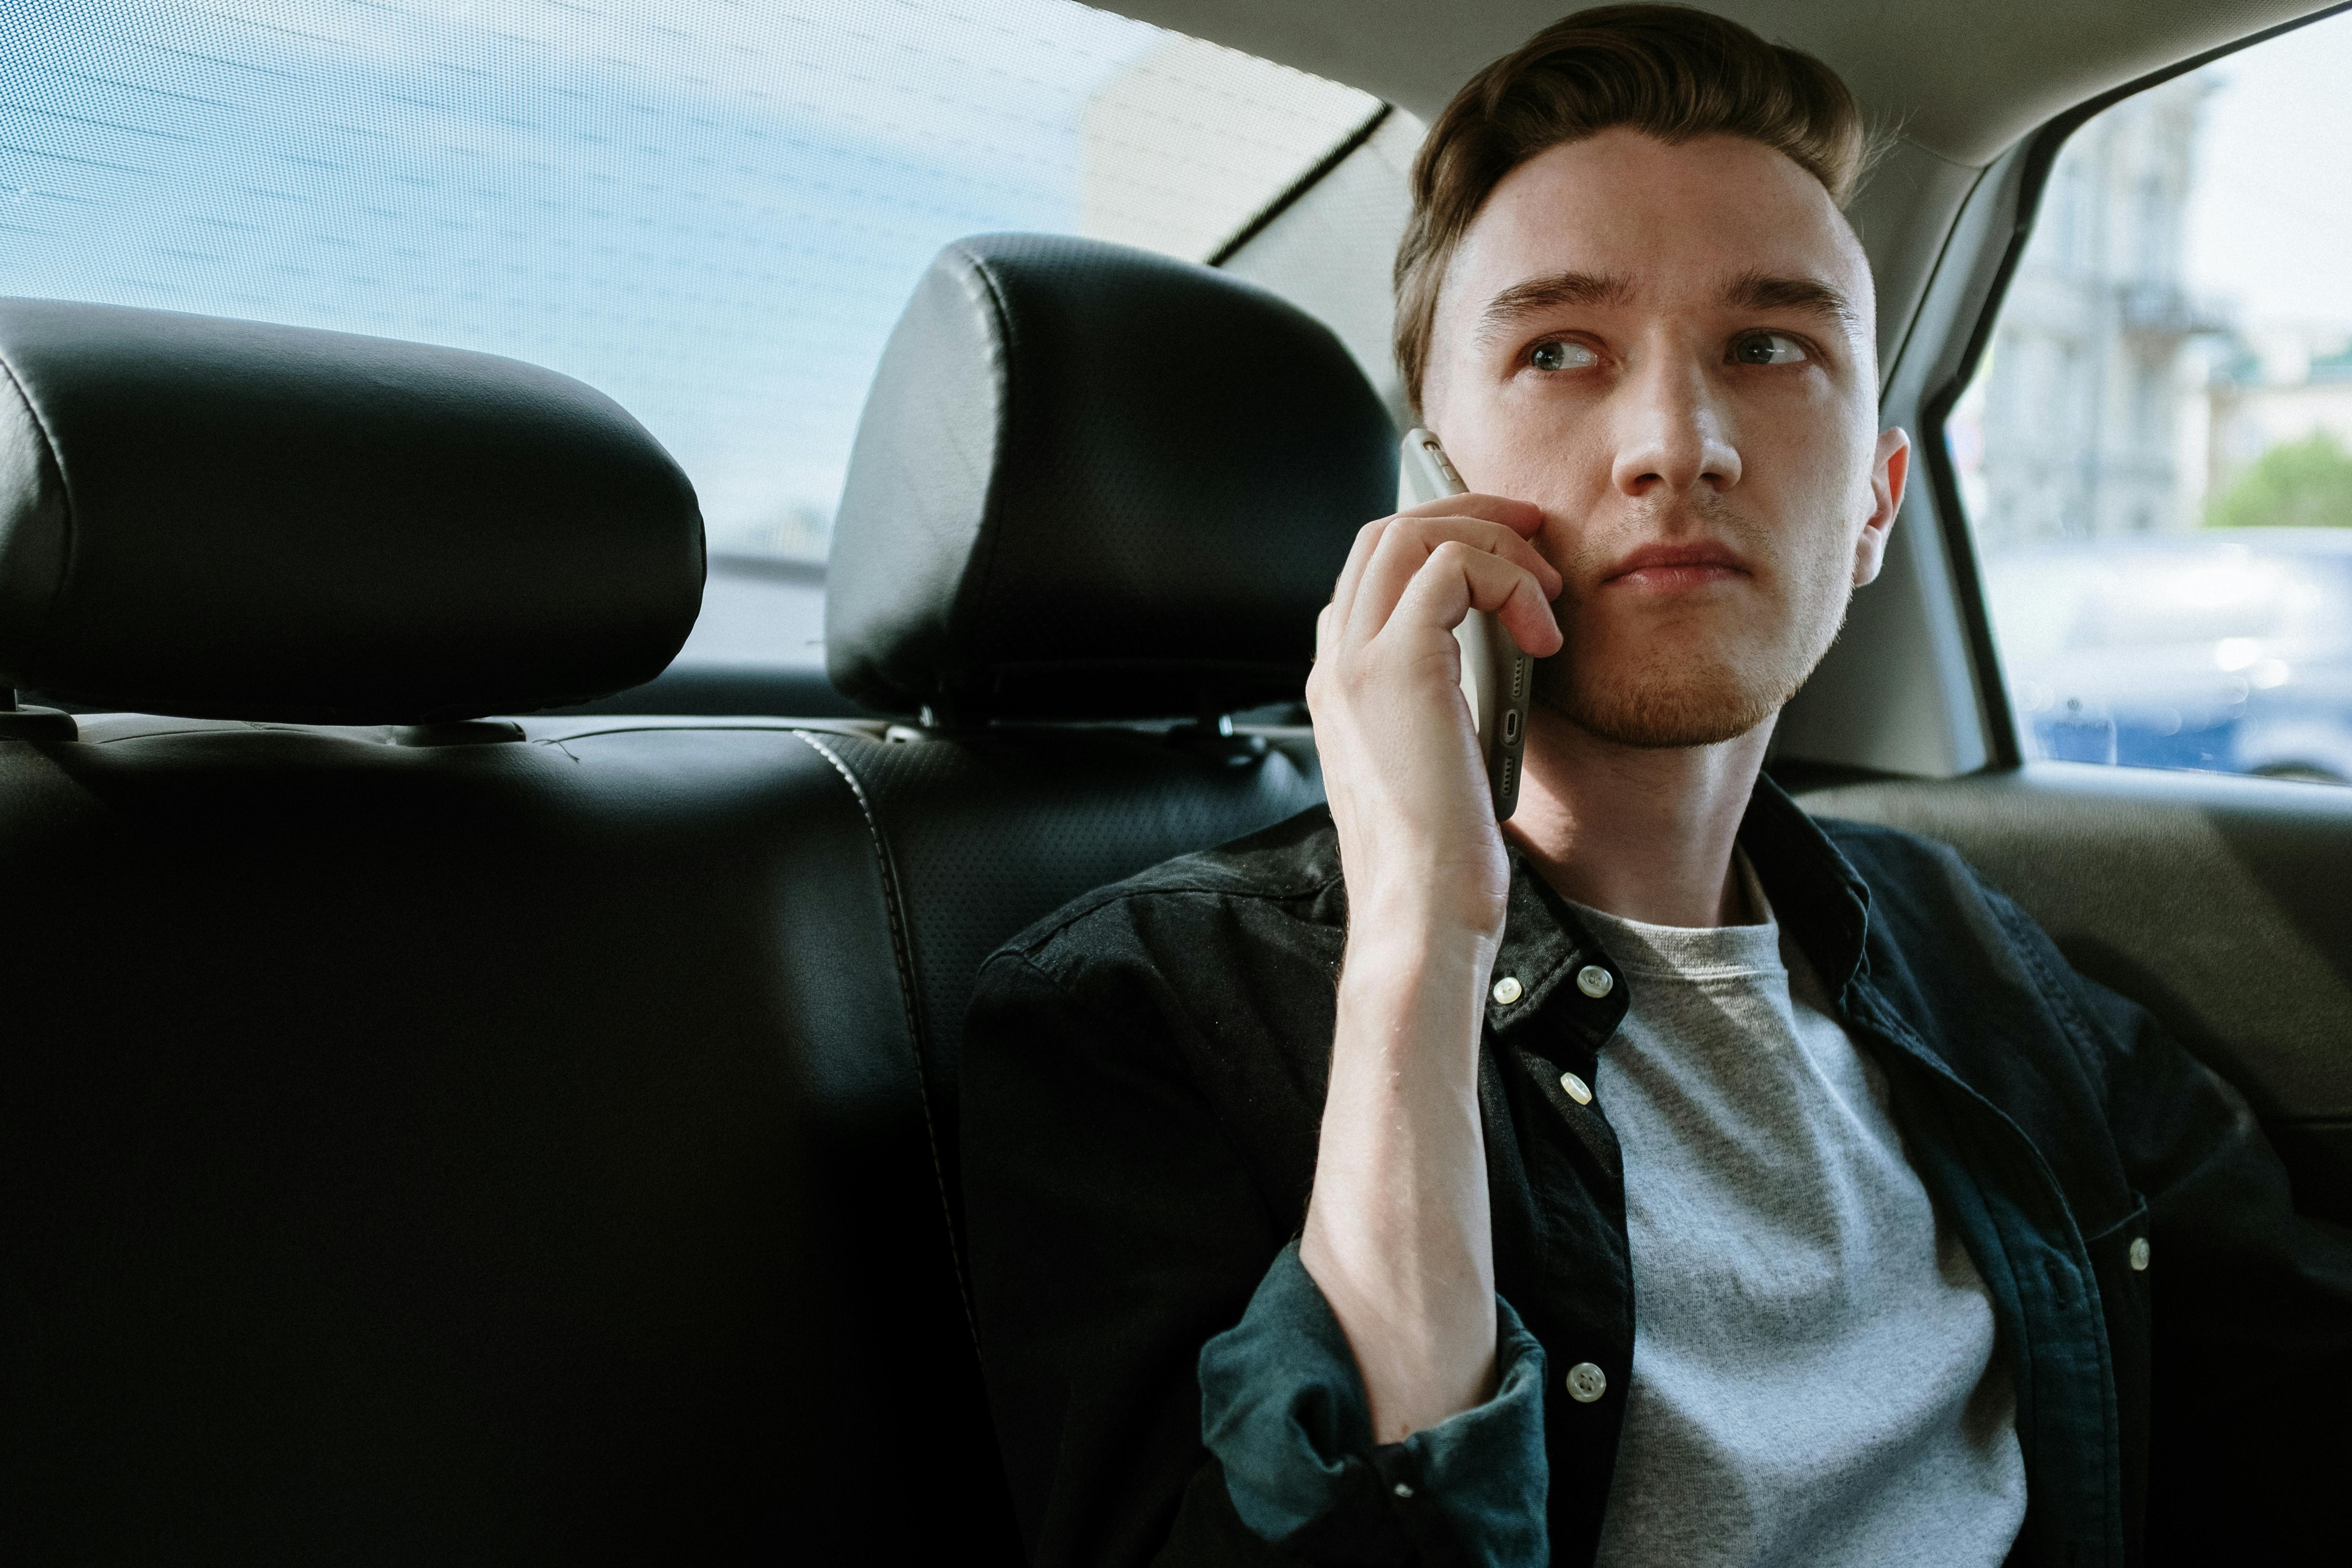 A man in a car talking on phone | Source: Pexels